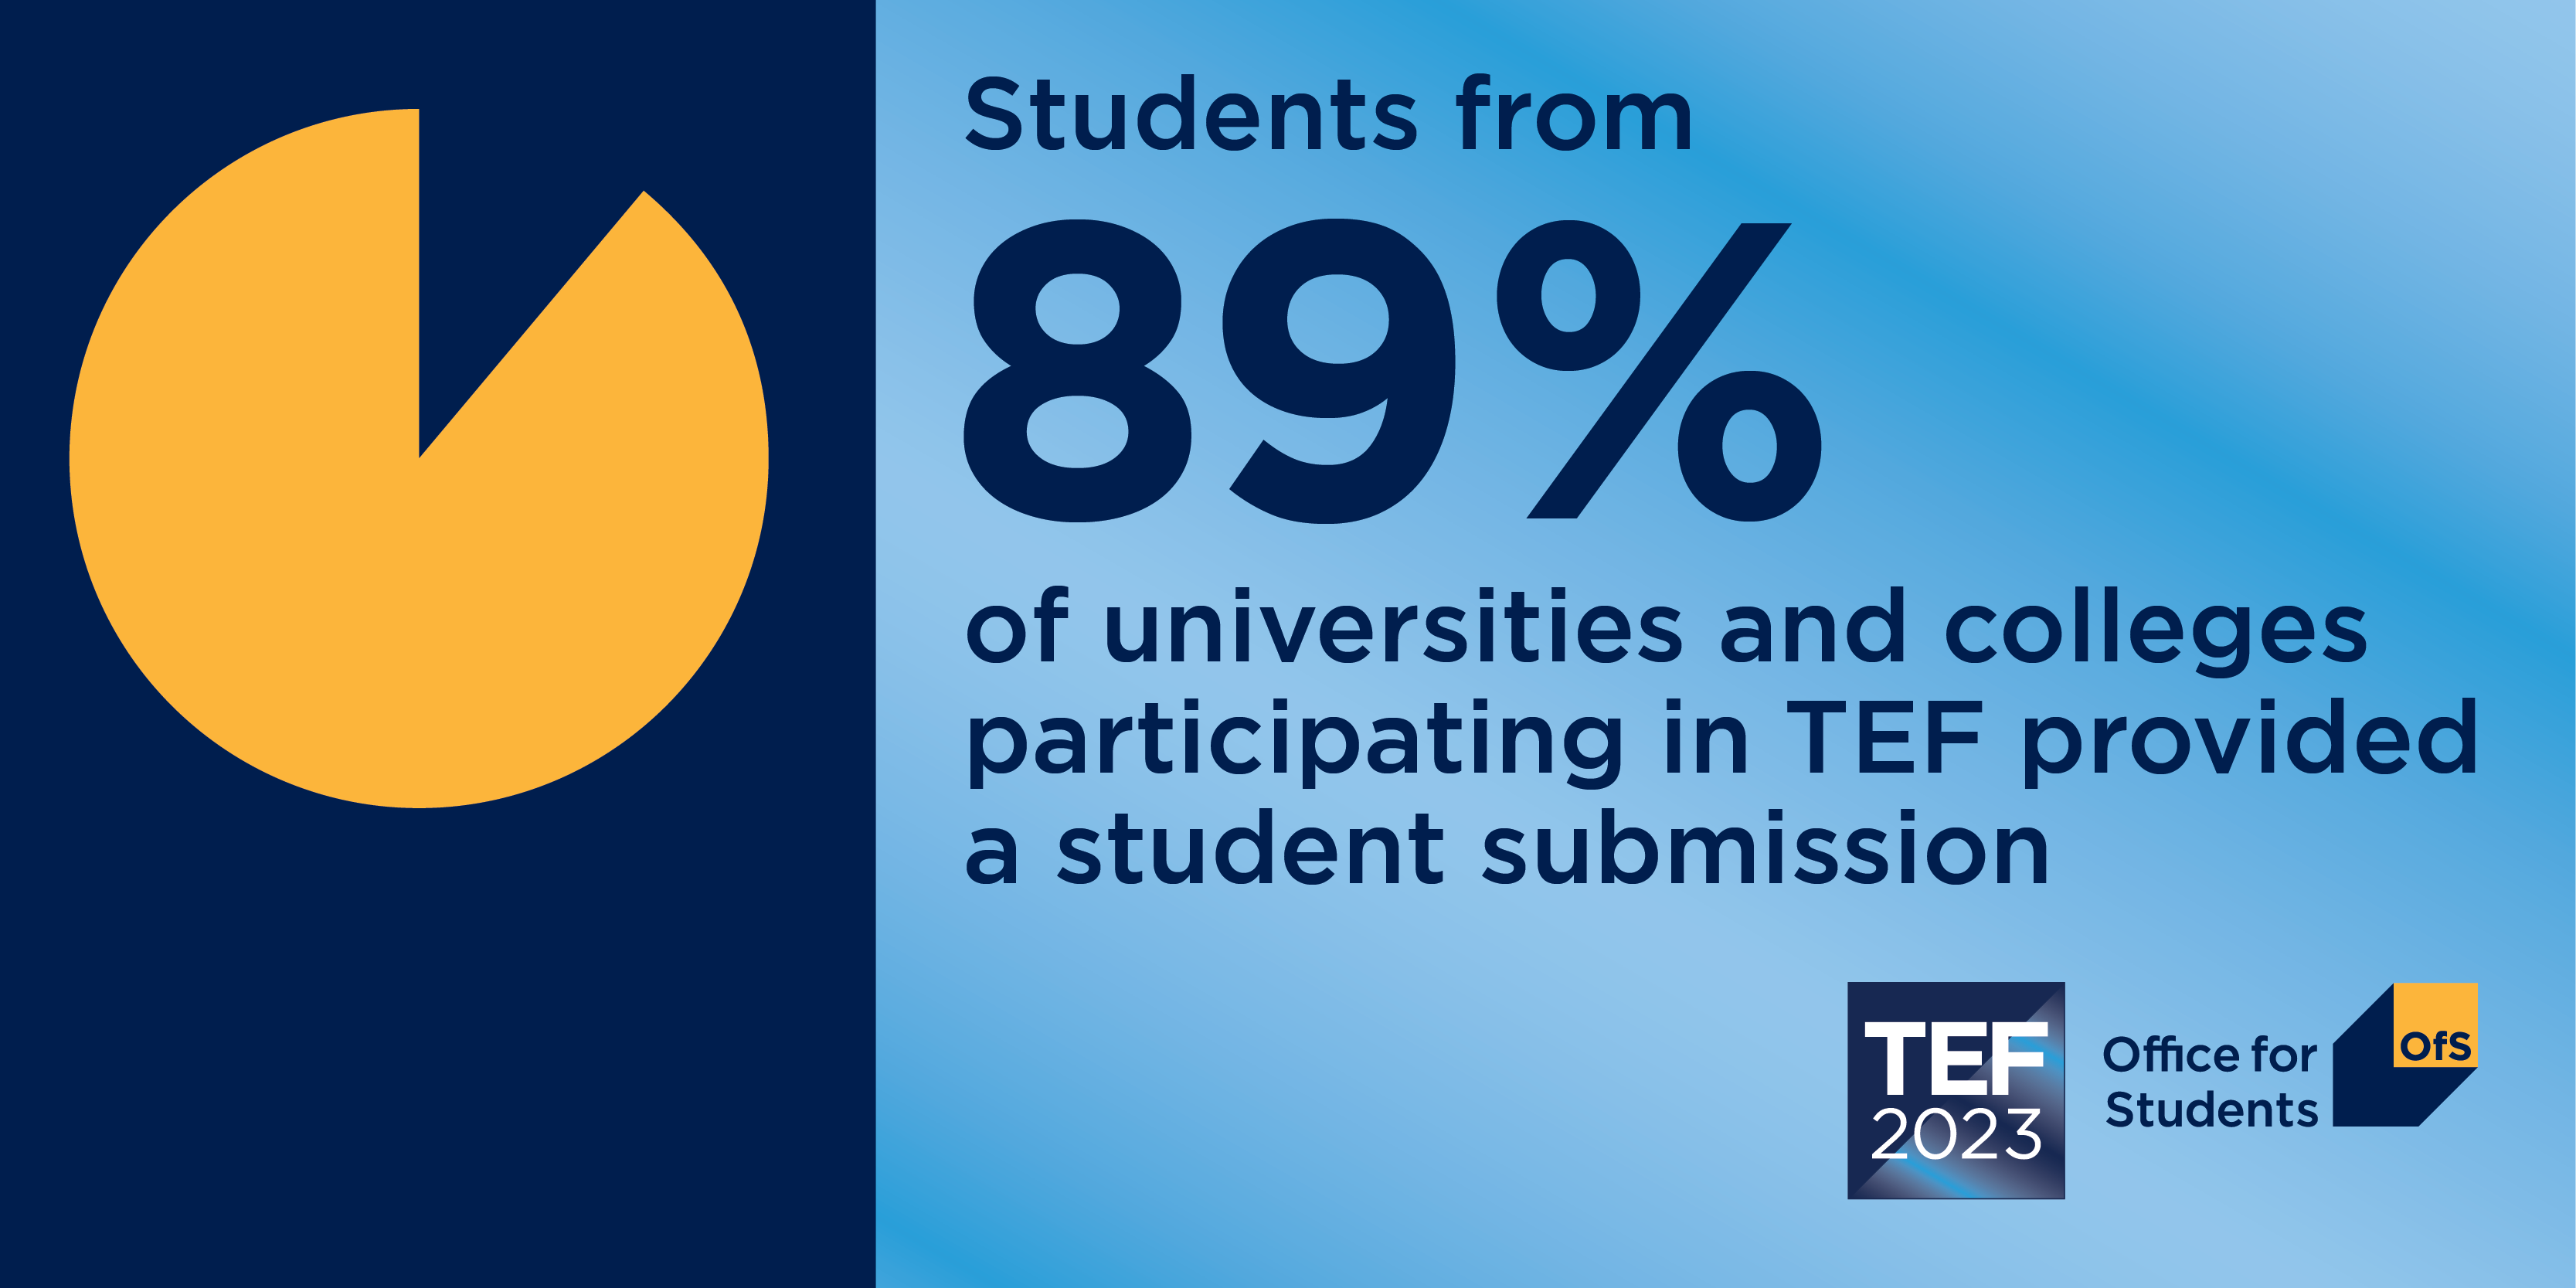 Students from 89% of universities in TEF provided a student submission